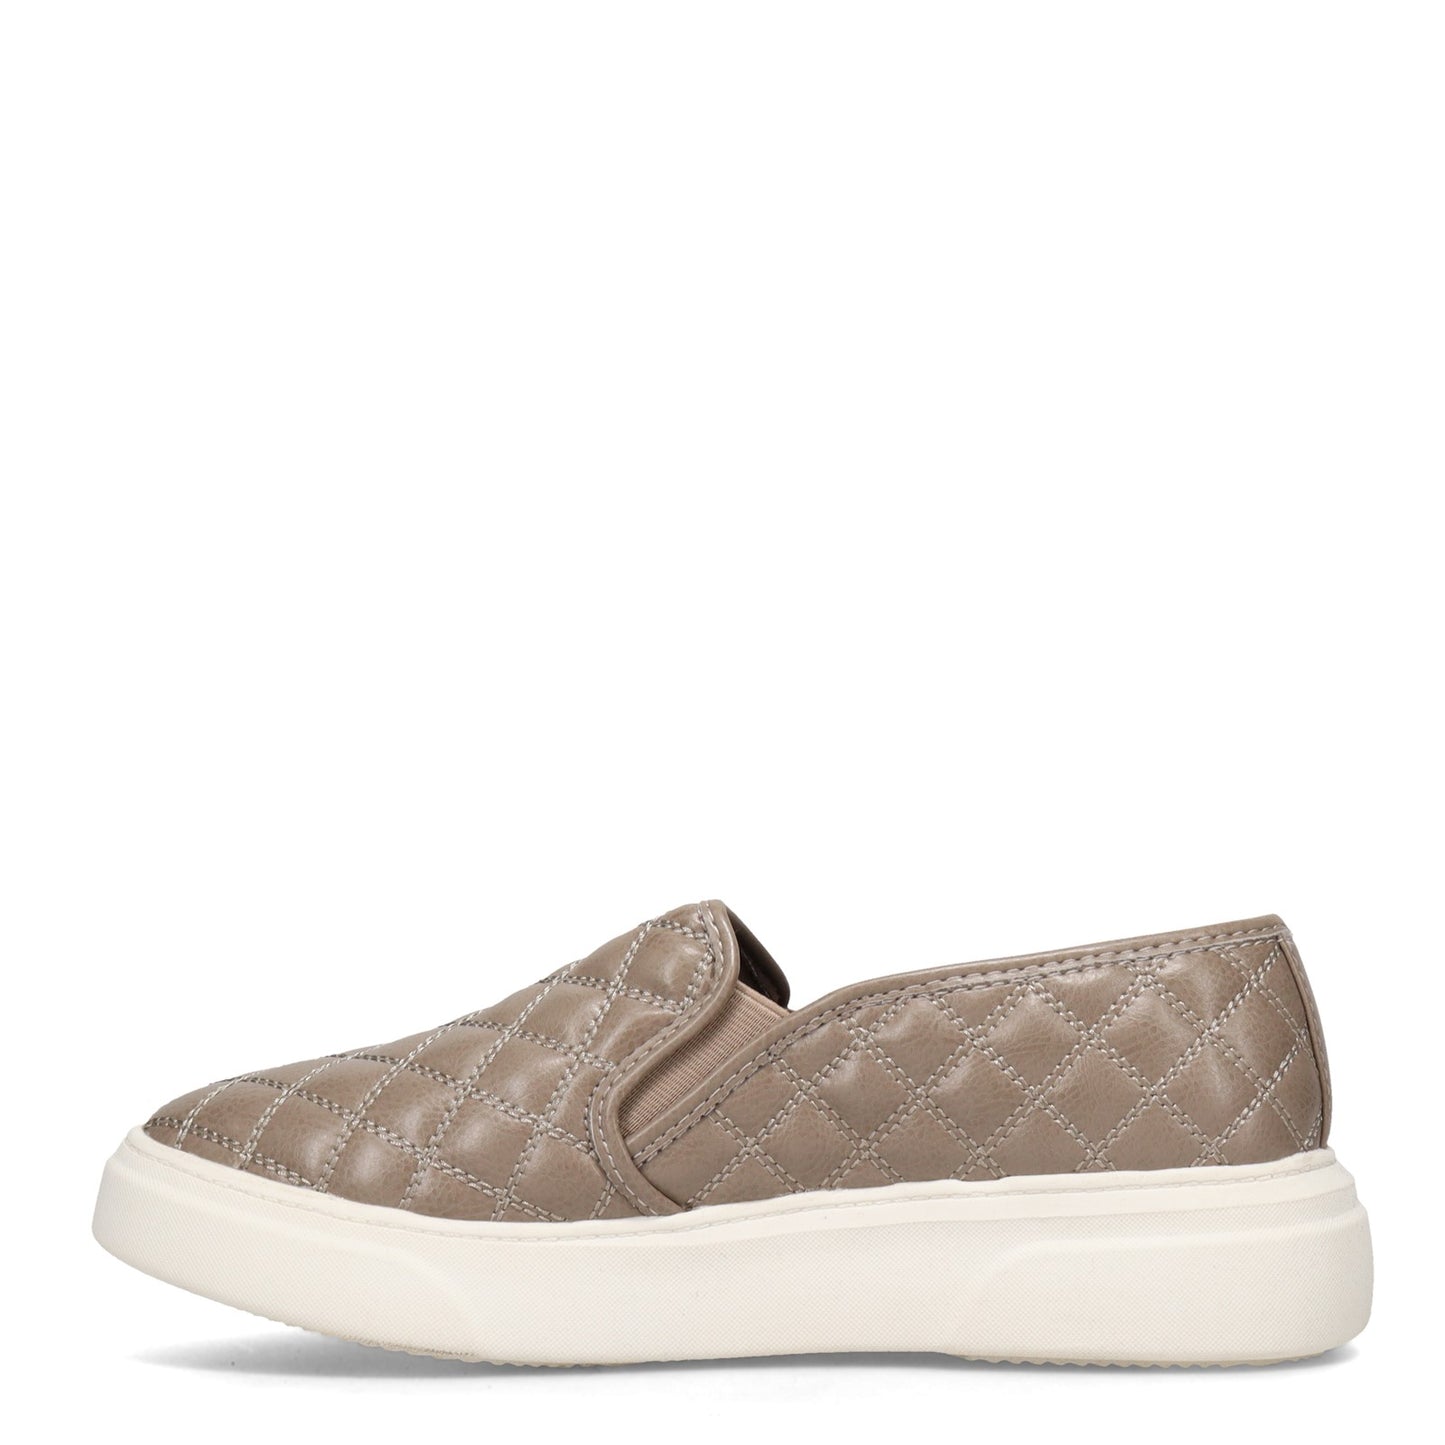 Peltz Shoes  Women's Madden Girl Cupid Slip-On TAUPE CUPID-TAUPE